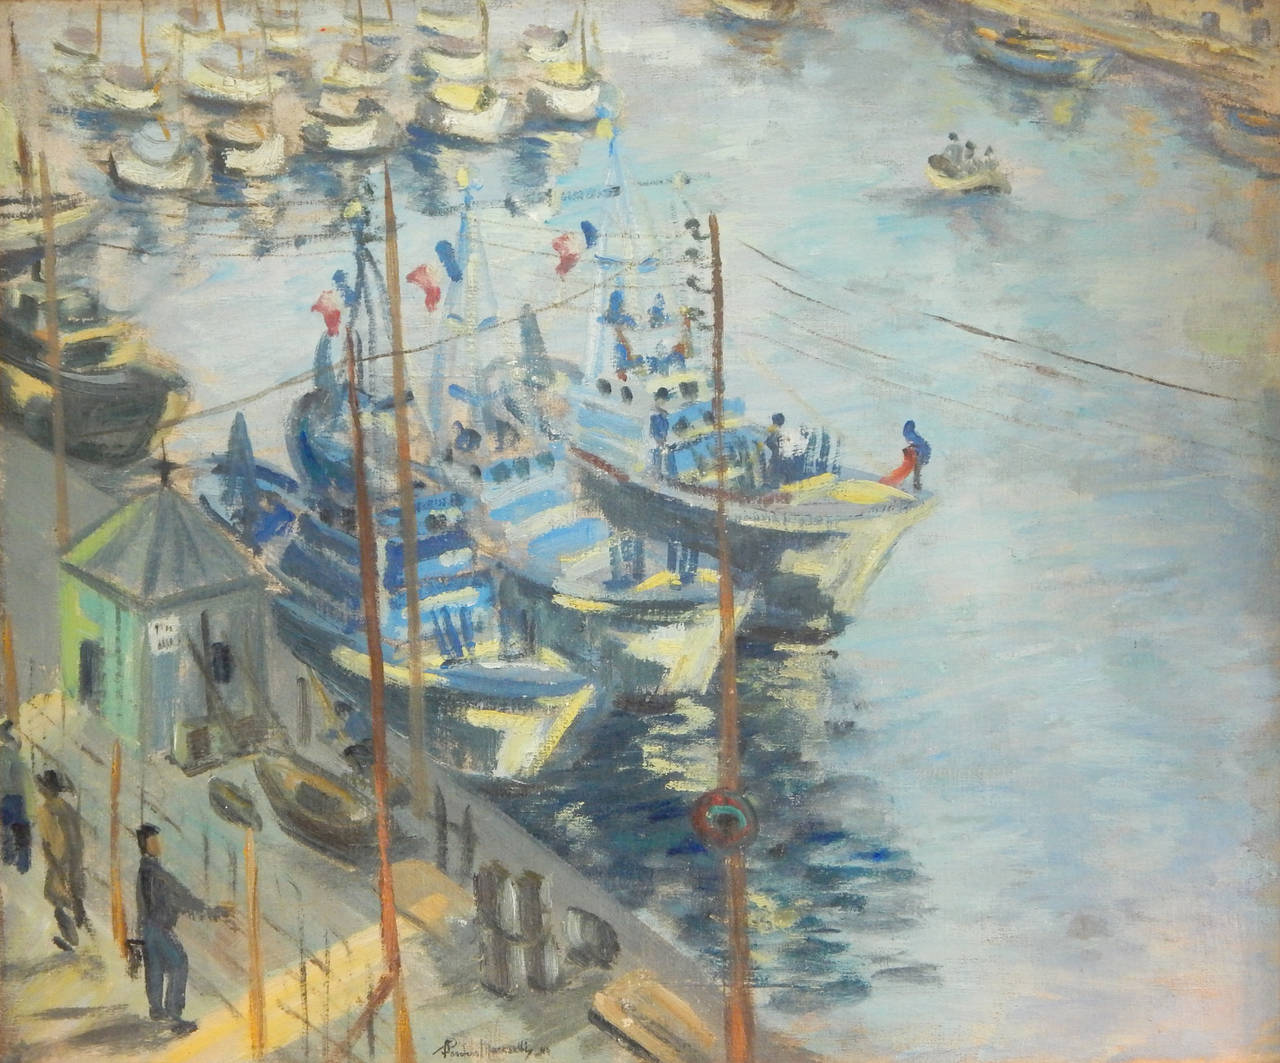 Wonderful Mid-Century oil on canvas of a French Harbor, signed Roudens Maroselli, 1949. Has been professionally cleaned and restored.